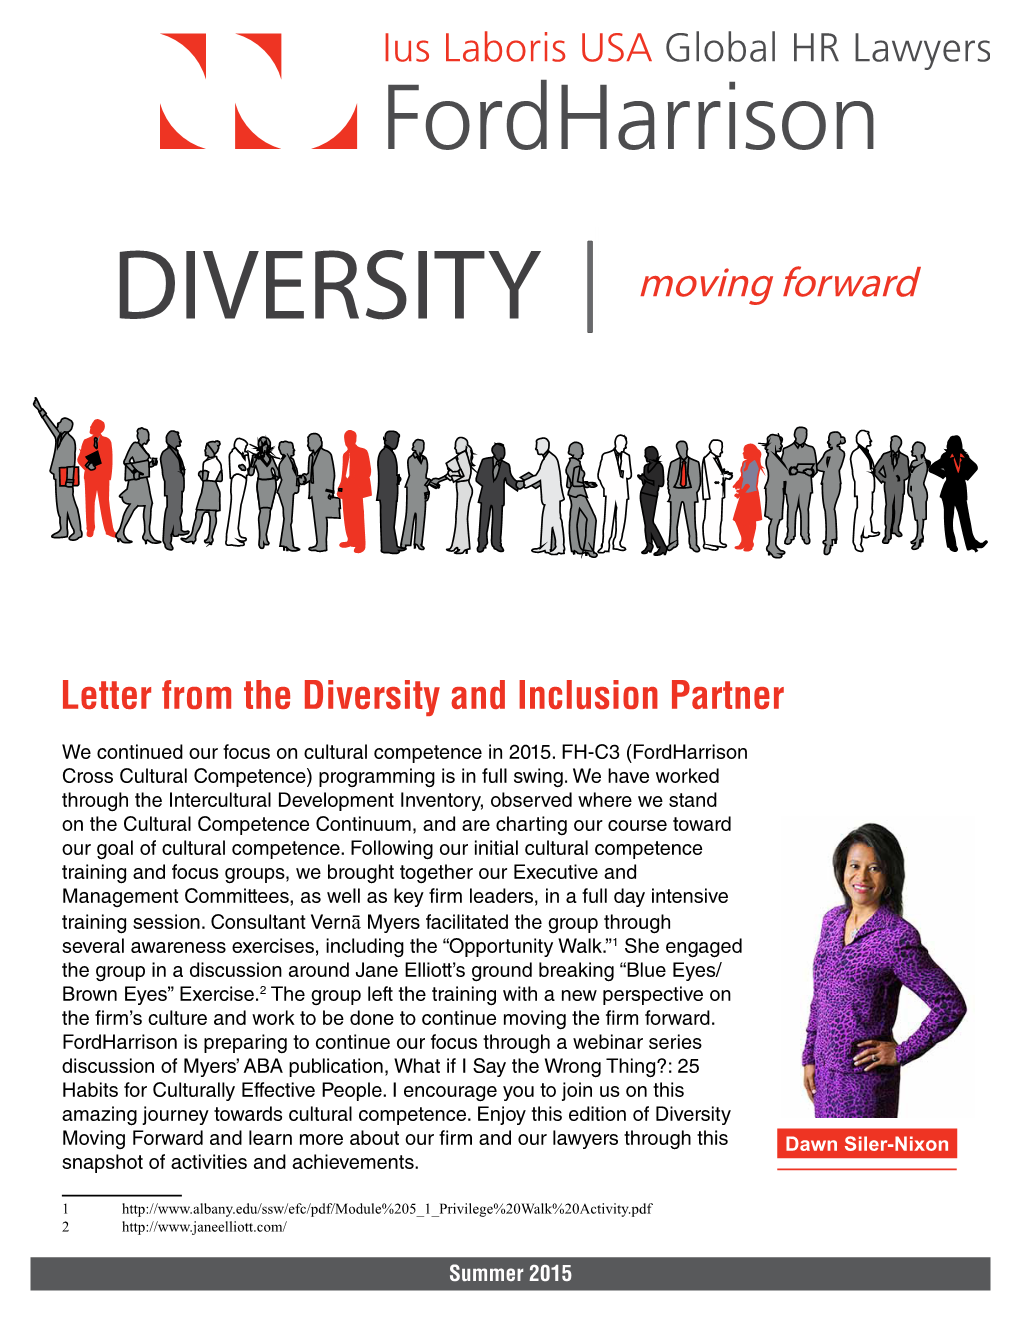 Diversity Moving Forward and Learn More About Our Firm and Our Lawyers Through This Dawn Siler-Nixon Snapshot of Activities and Achievements